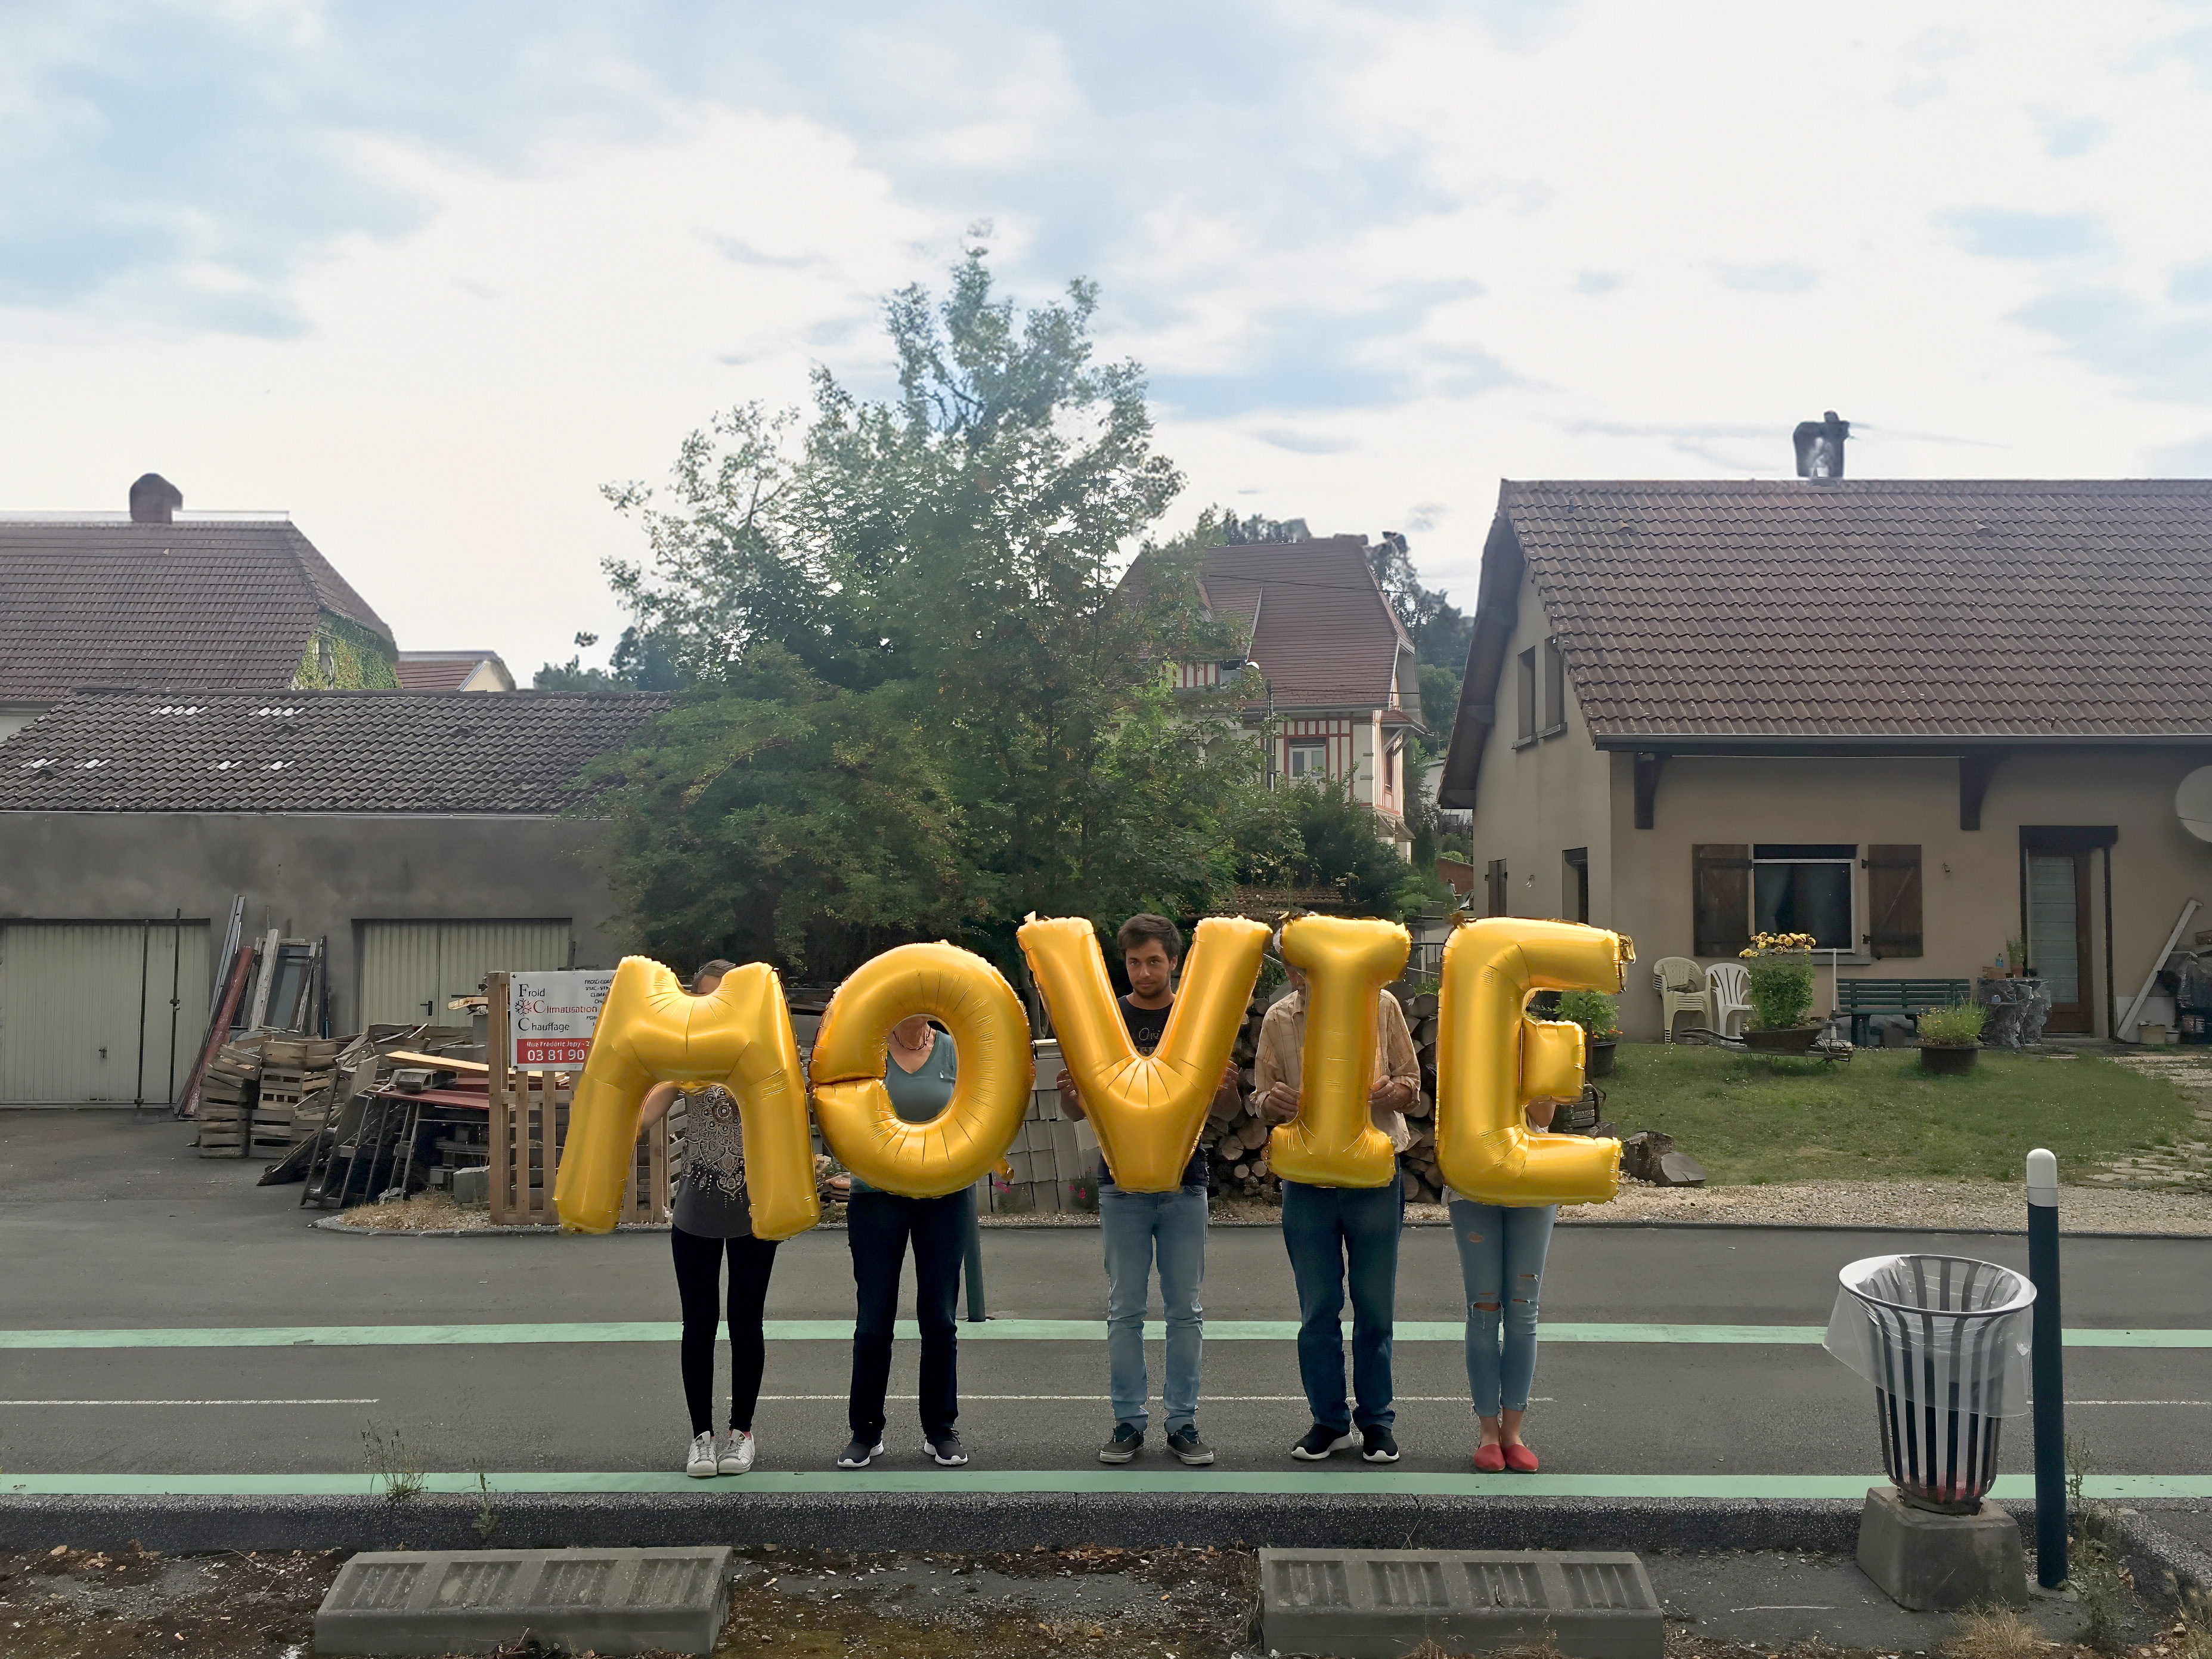 France, Montbeliard, Super U et Drive - Movie, Silence was Golden, gold balloons